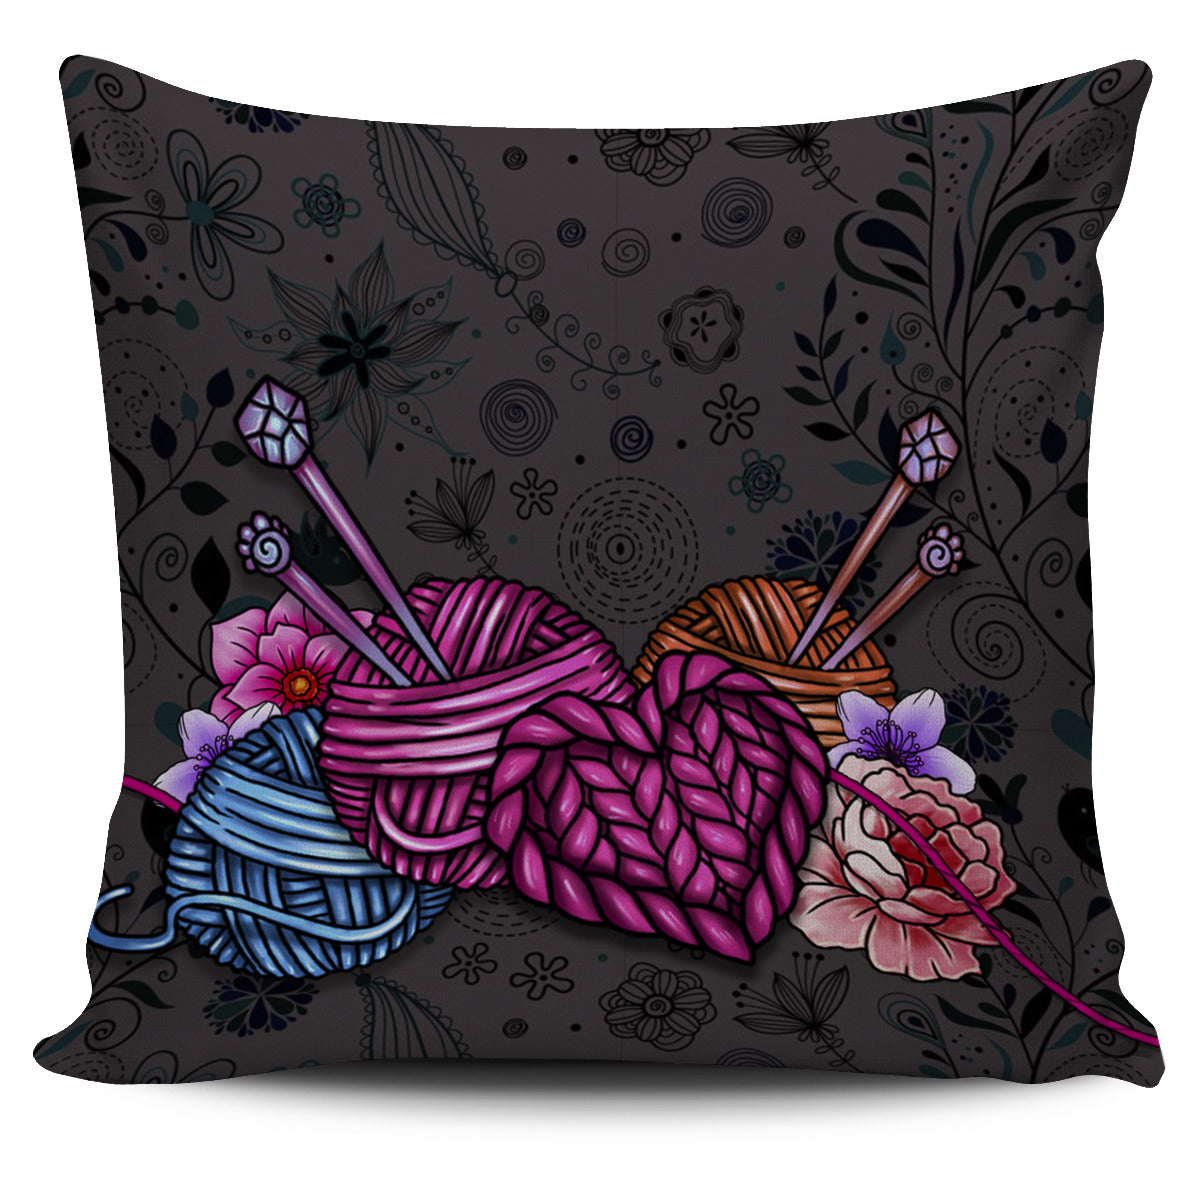 Floral Knitting Pillow Cover